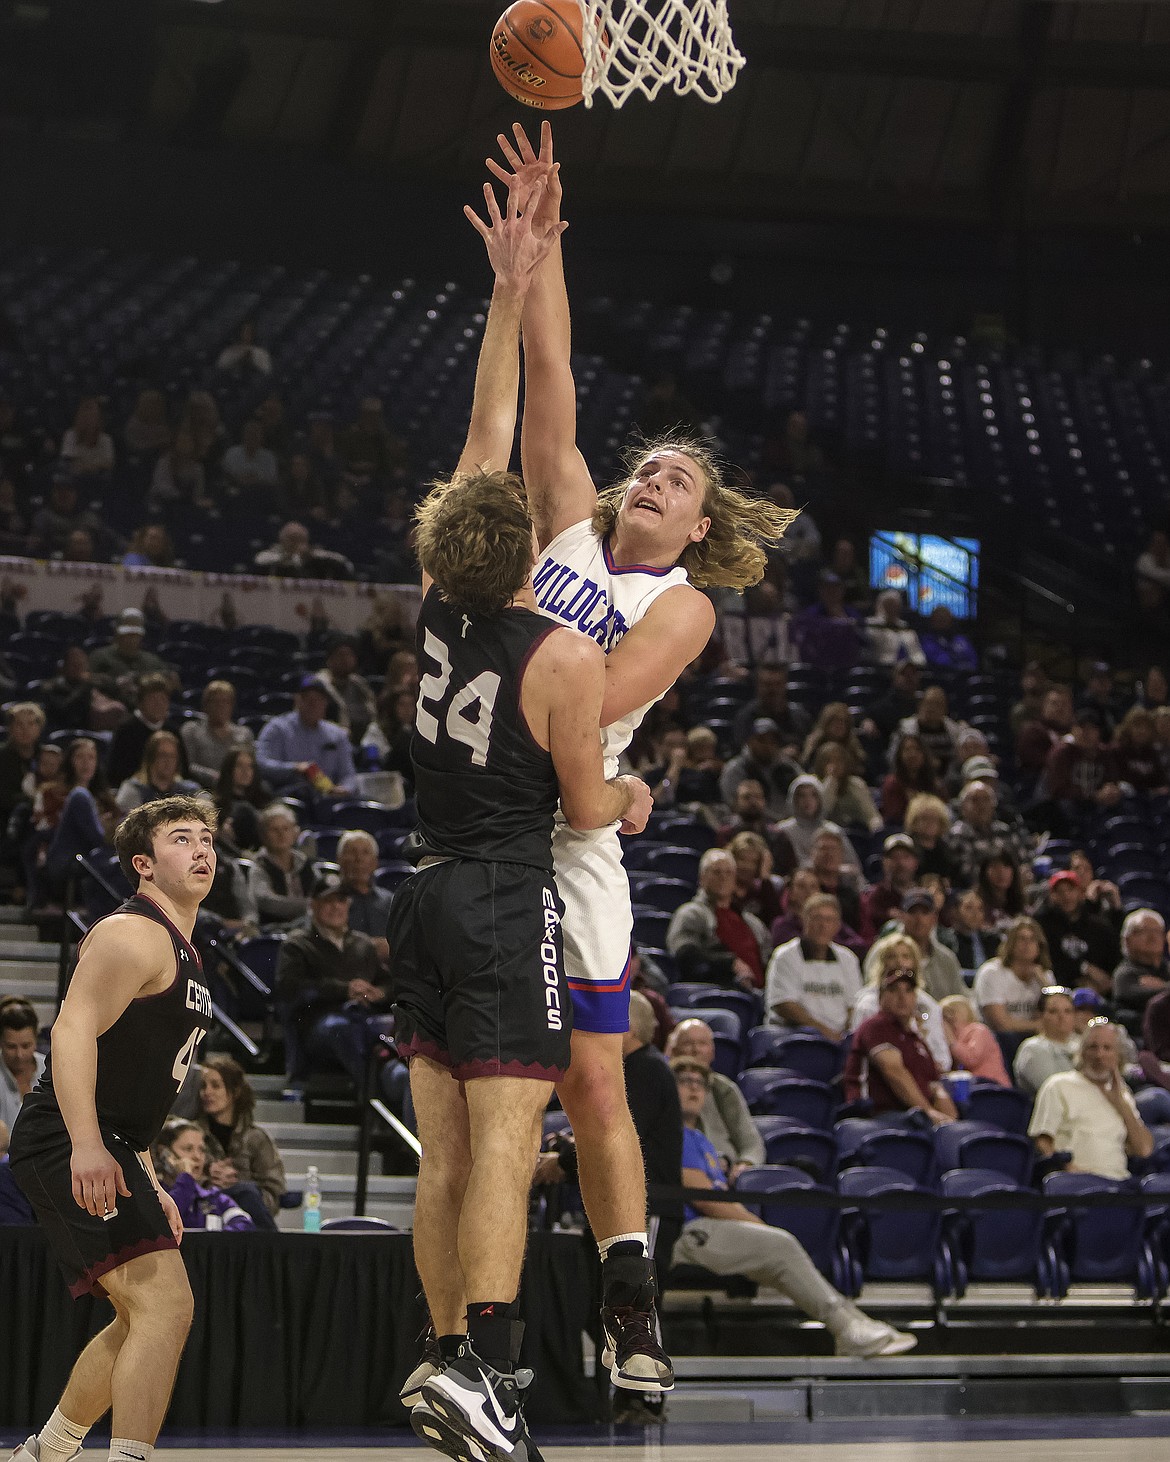 Cody Schweikert goes for a layup at State. (JP Edge photo)